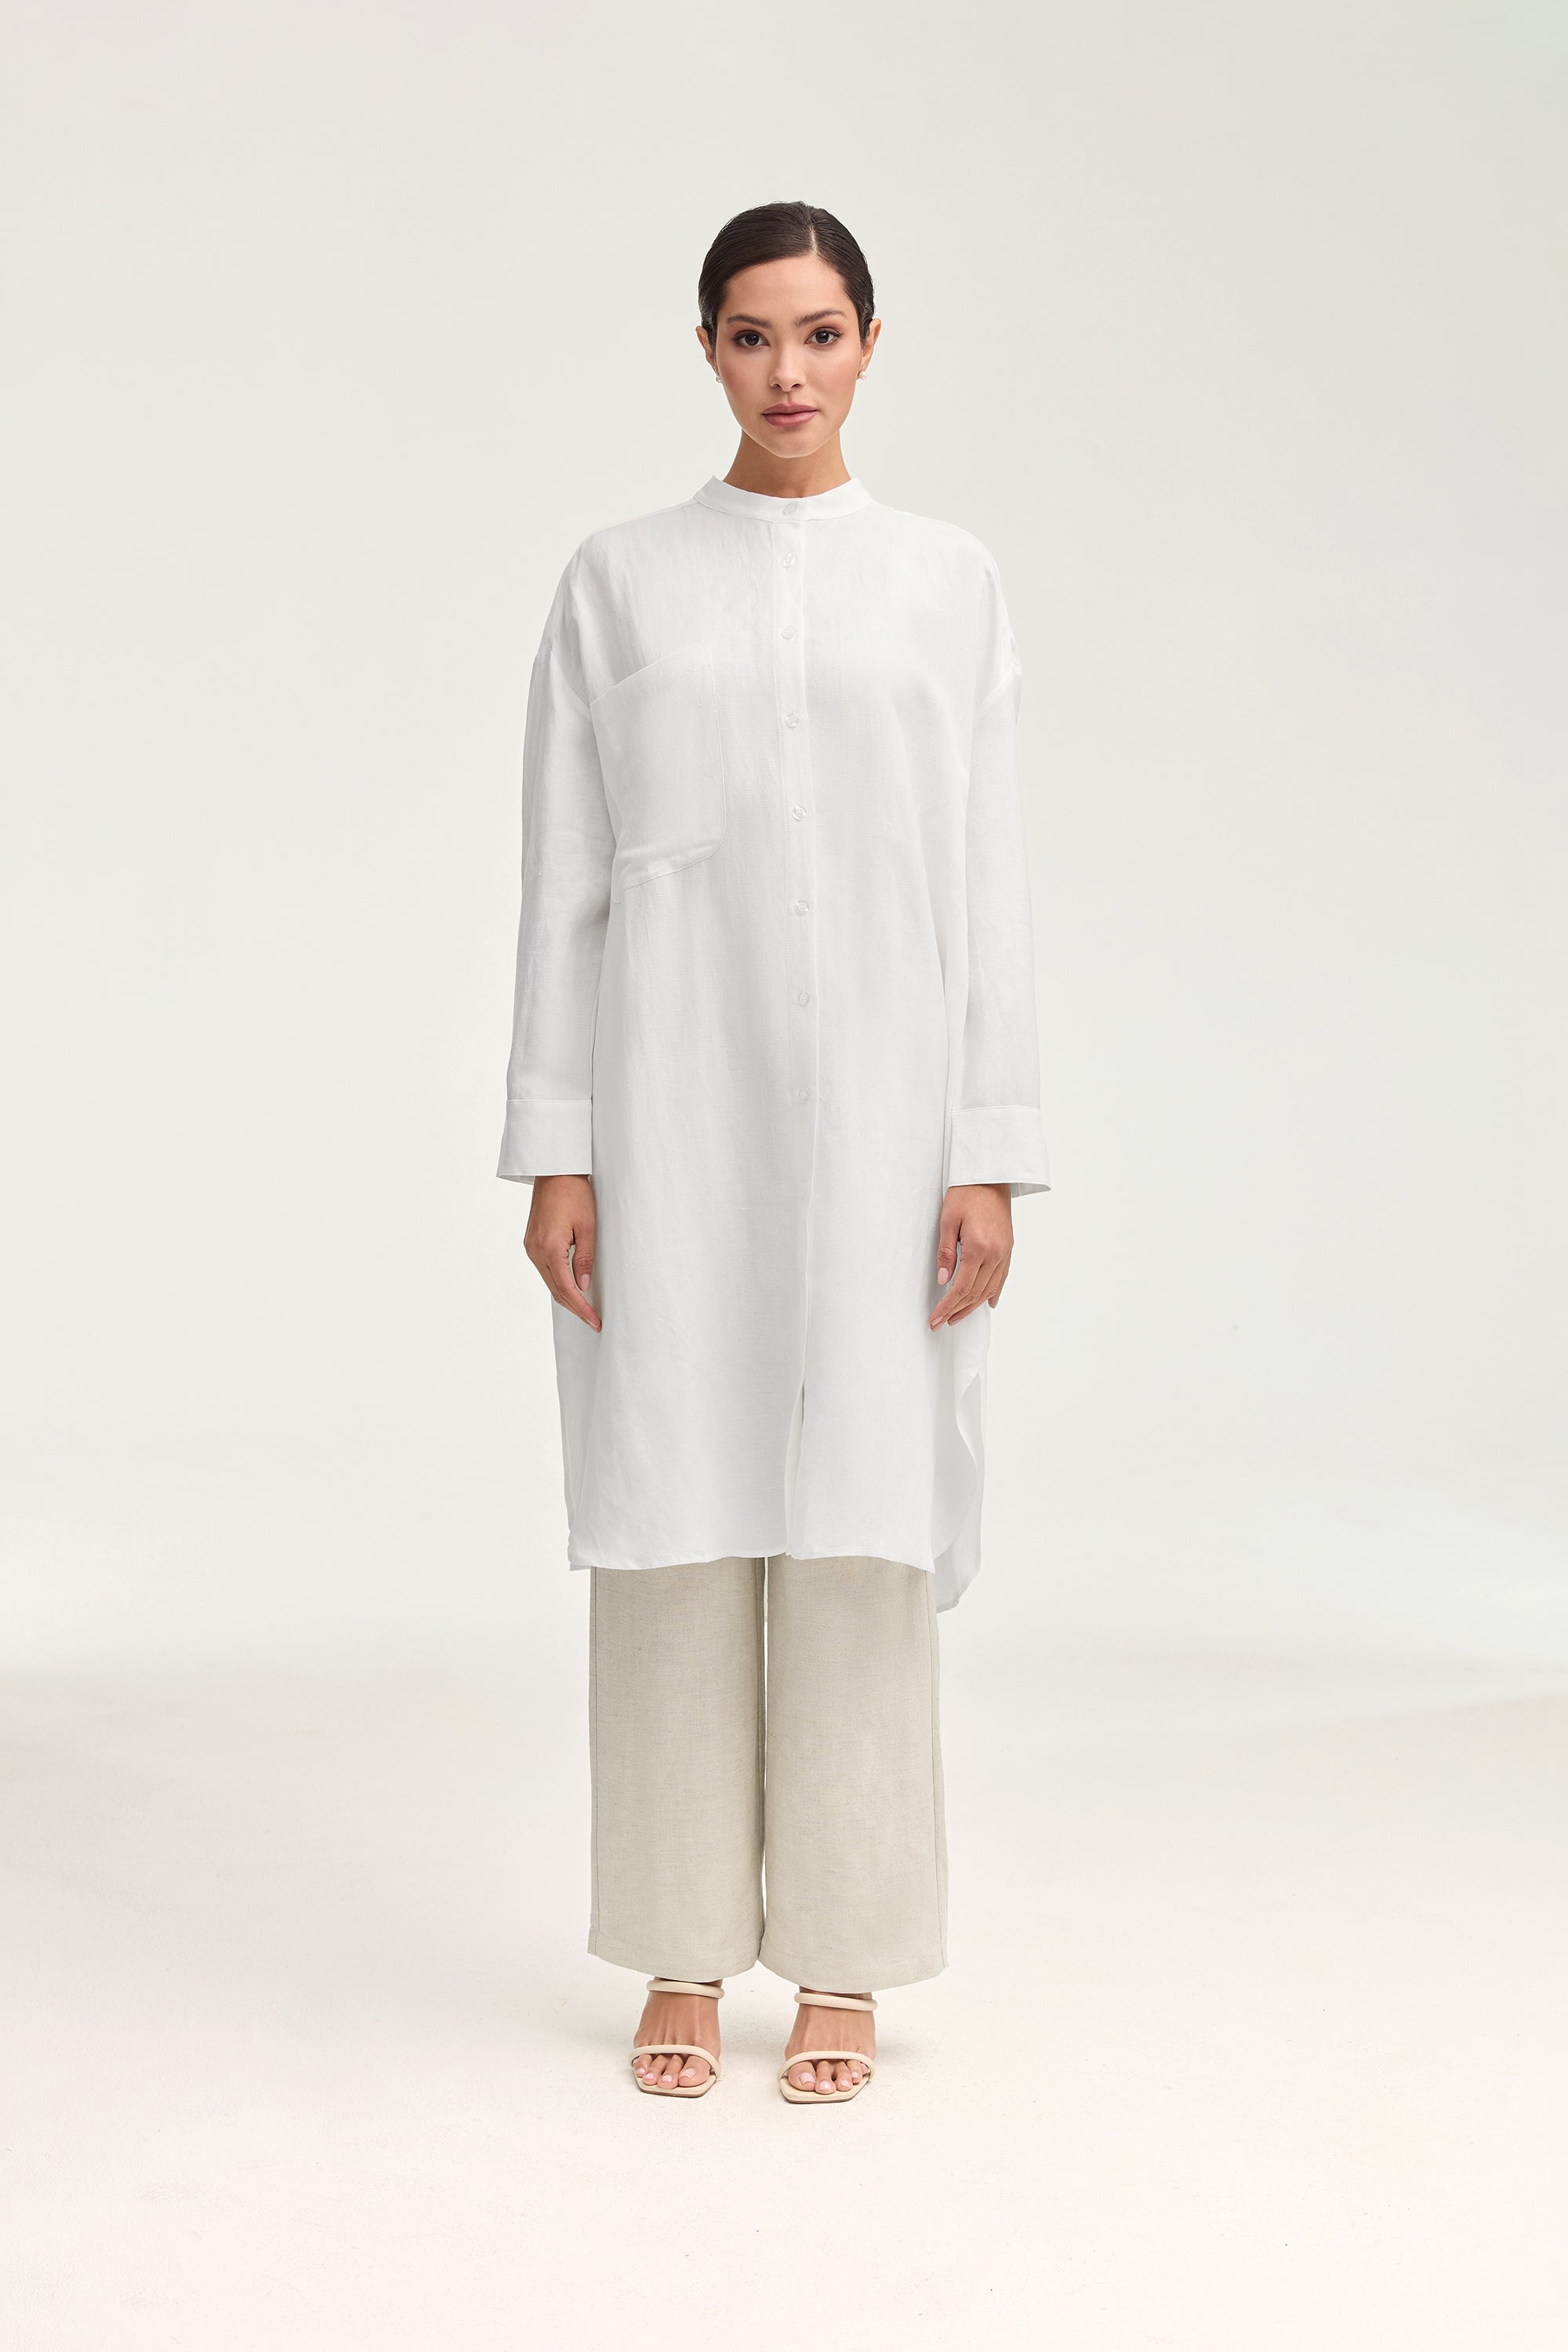 Linen Longline Button Down Cover Up Top - White Clothing epschoolboard 